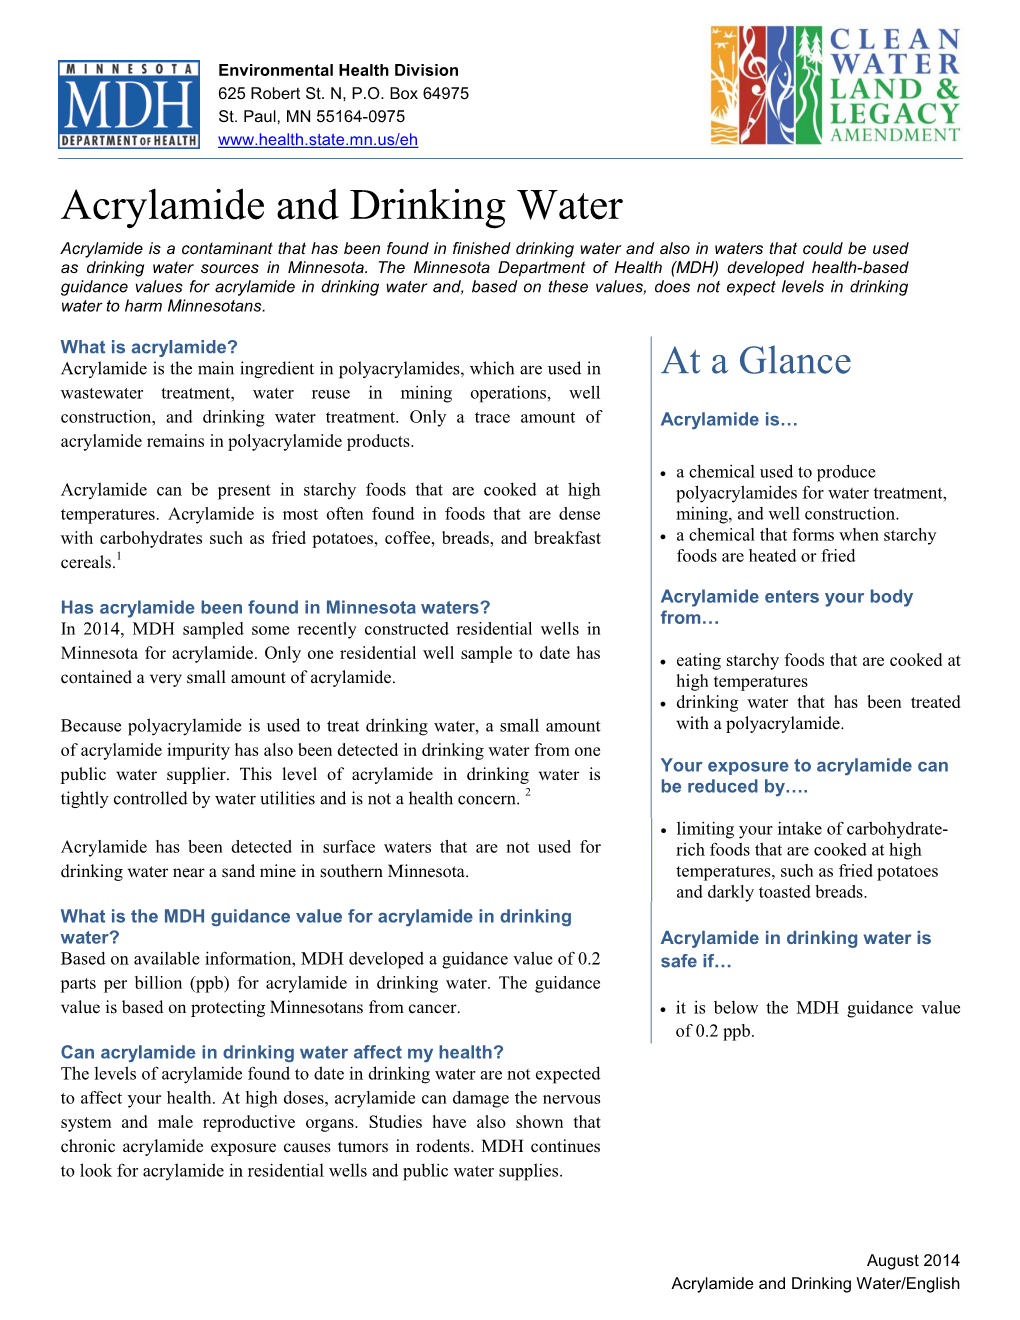 Acrylamide and Drinking Water (PDF)